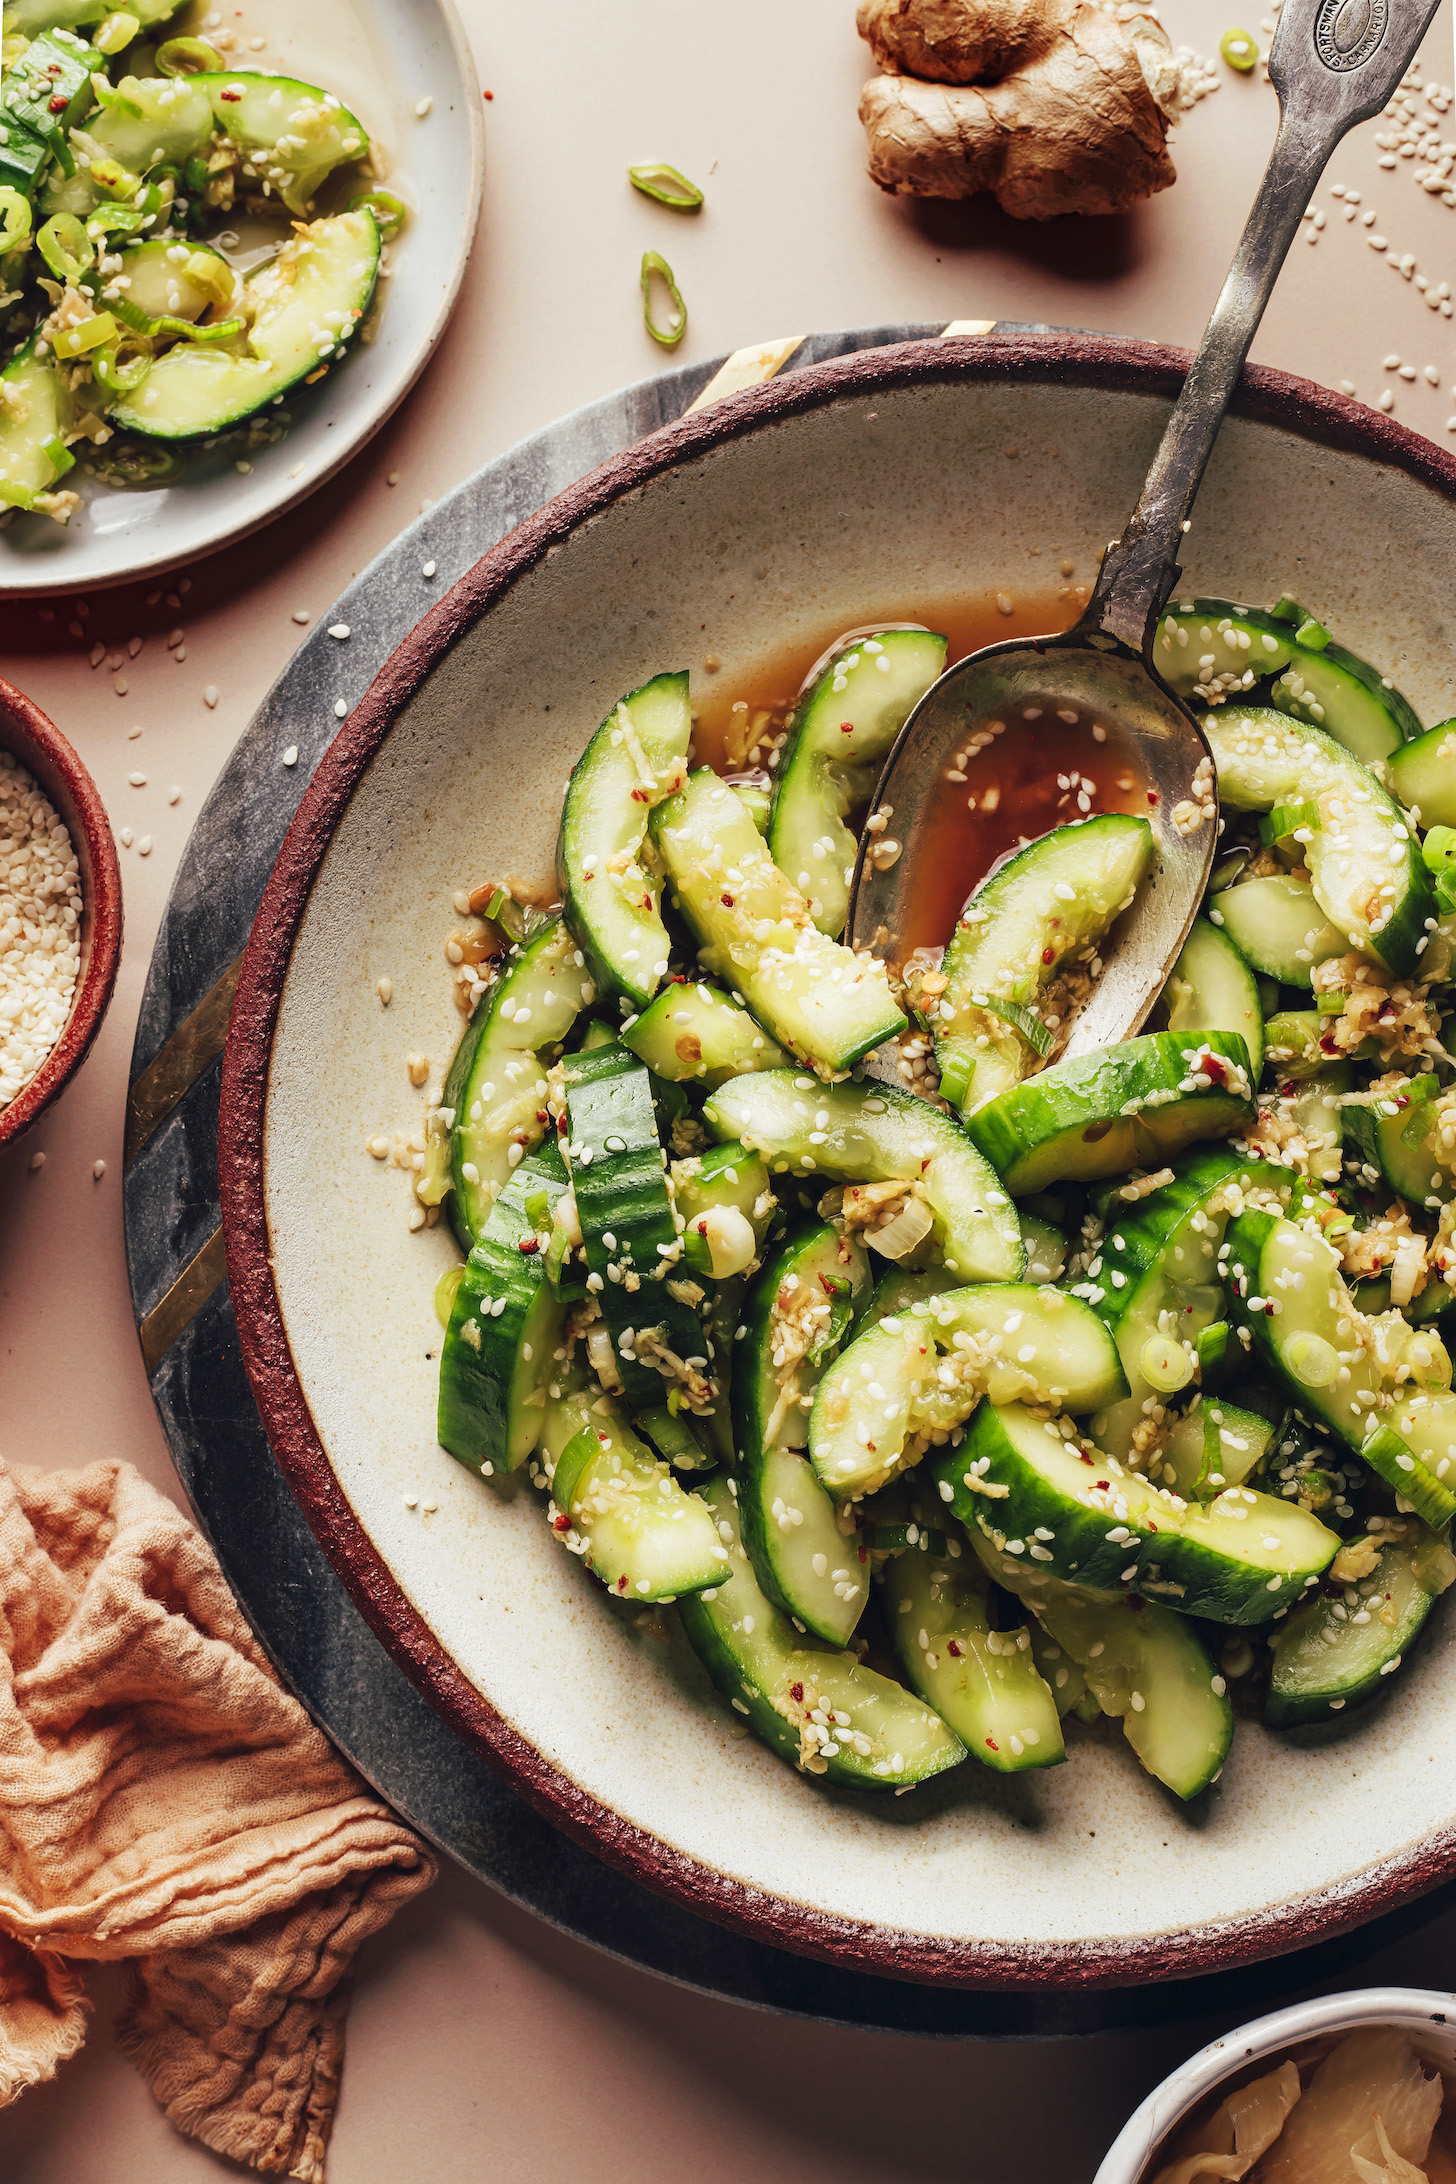 Spoon resting in a bowl of our ginger sesame smashed cucumber salad recipe